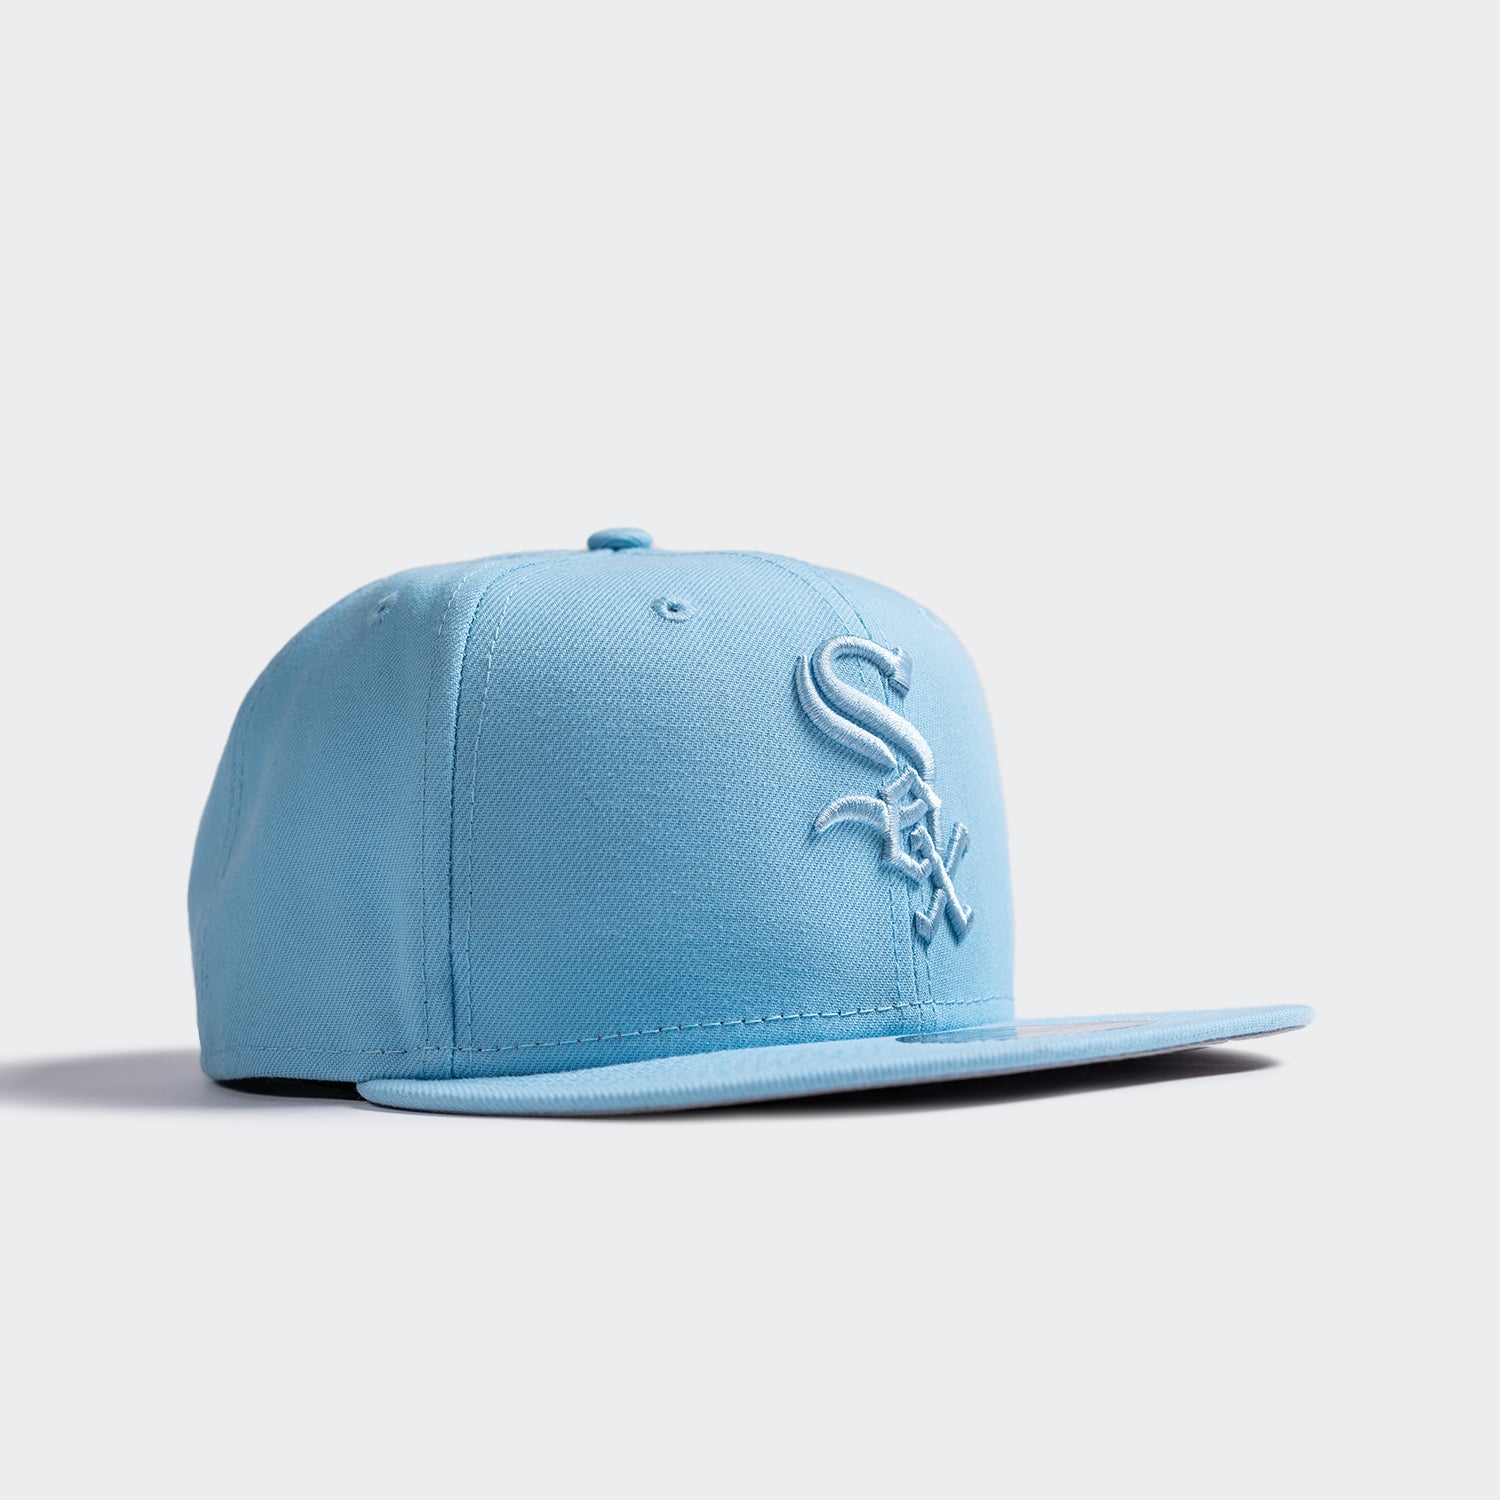 Boston Red Sox New Era All Sky blue City Connect 9FIFTY Adjustable